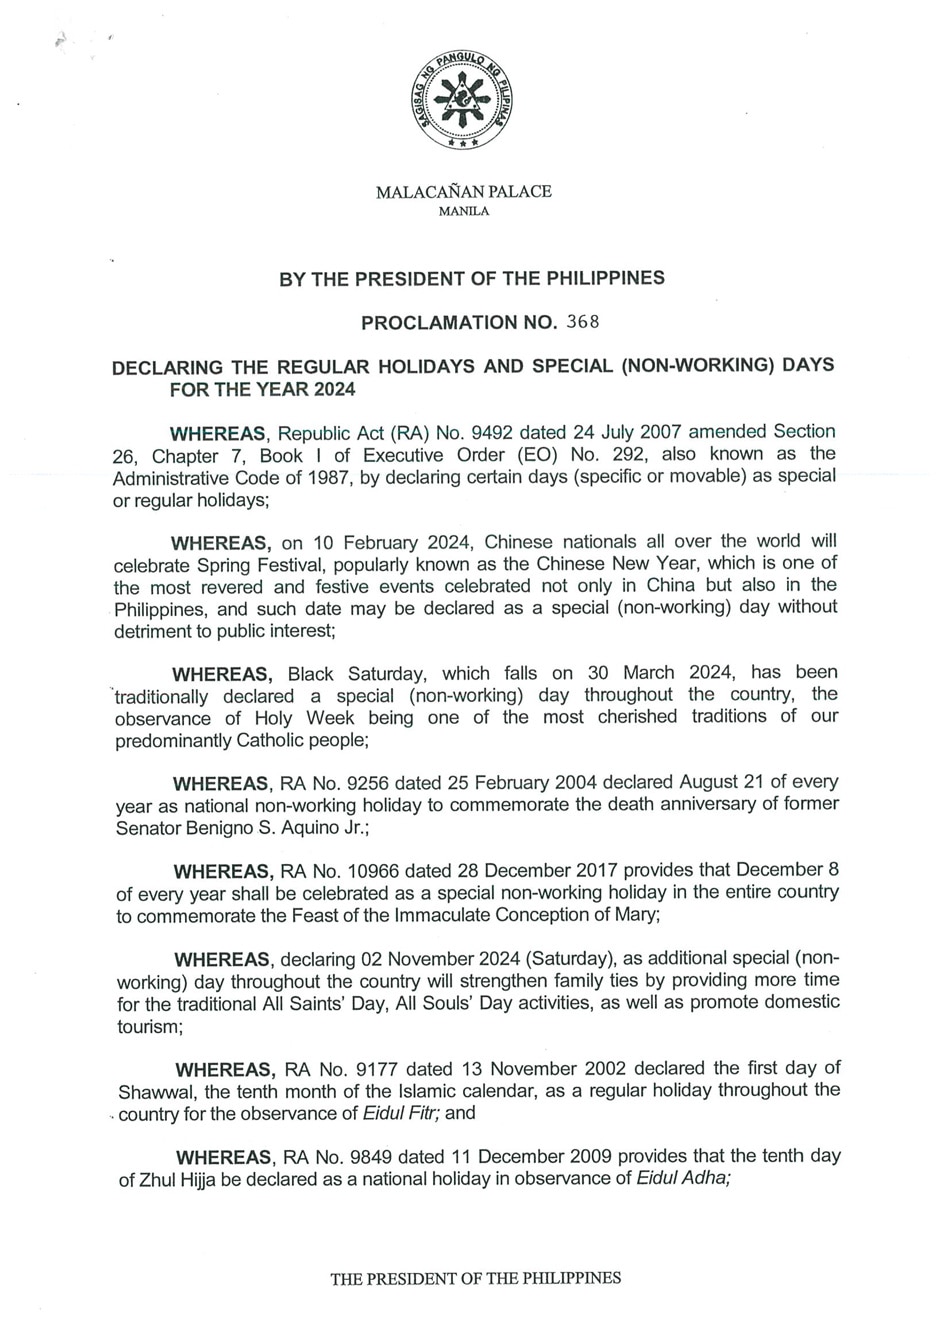 Palace lists holidays, special days in 2024 ABSCBN News